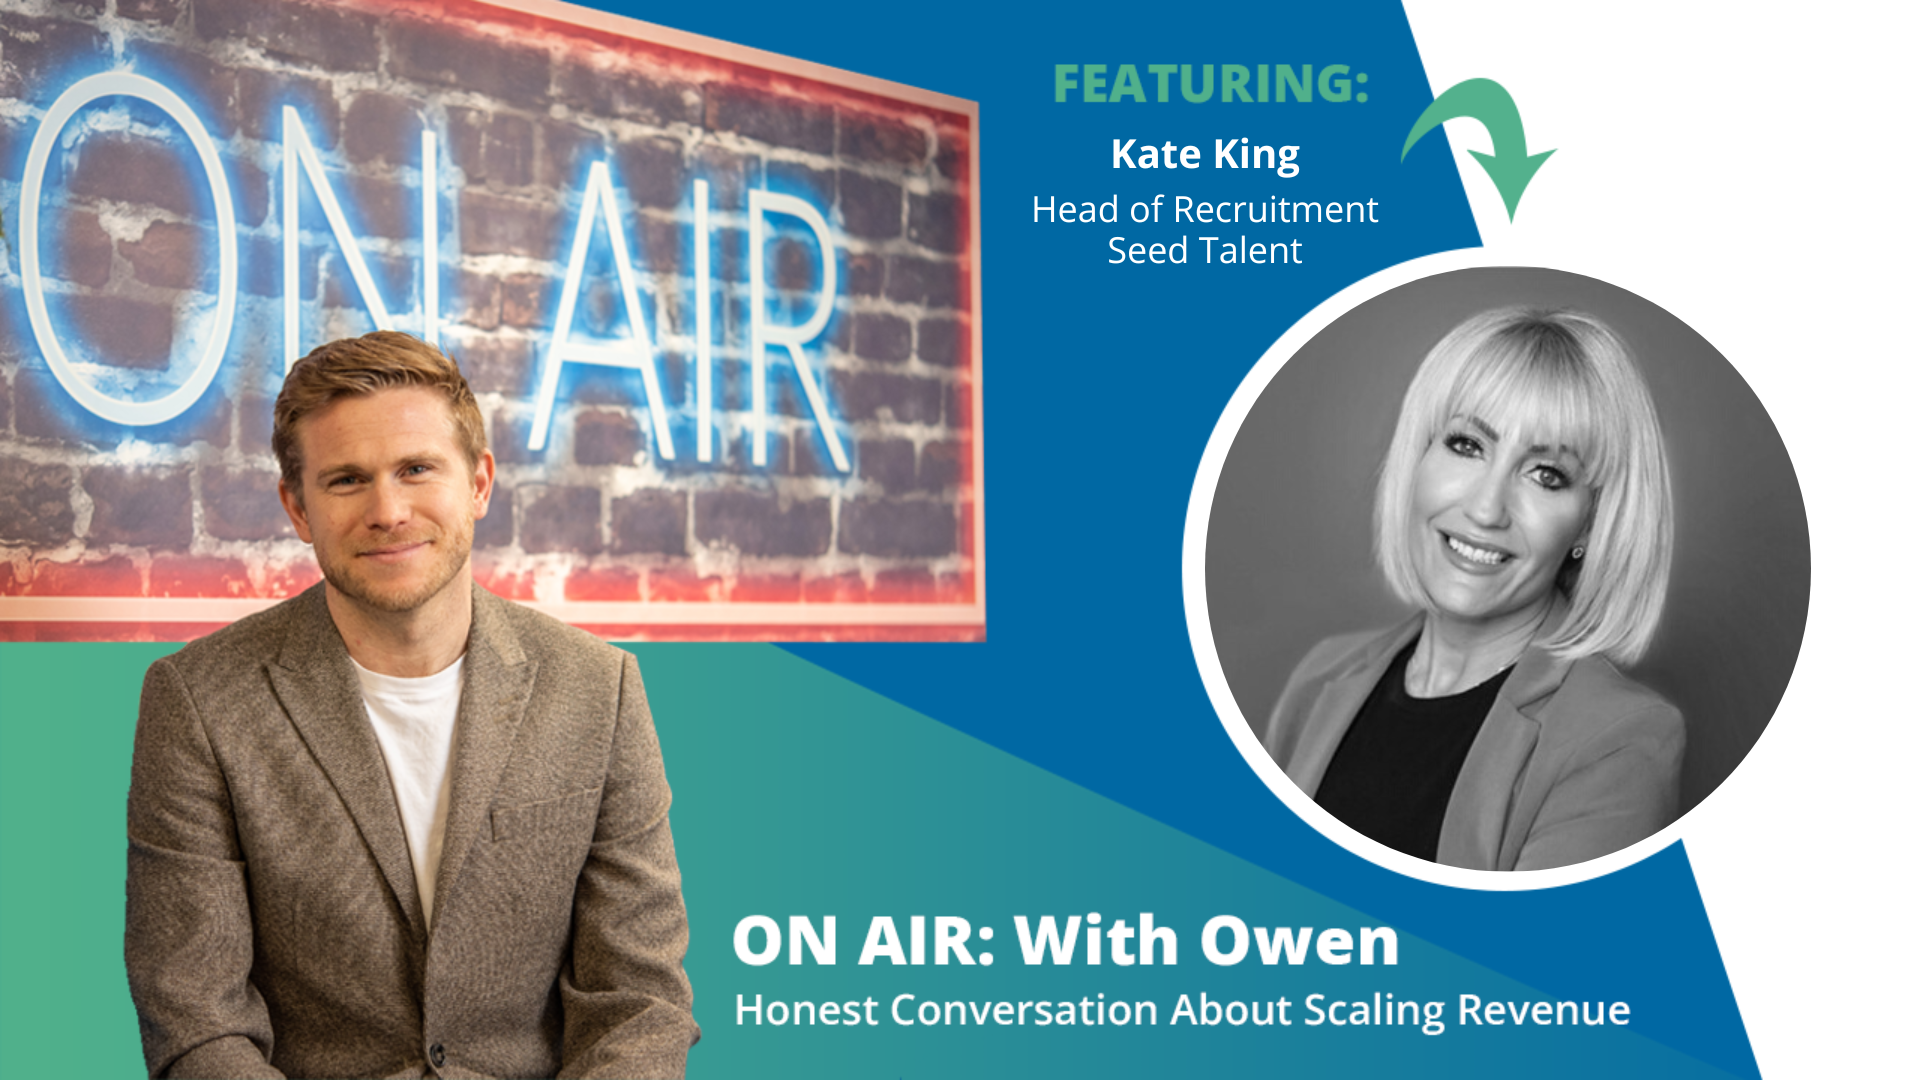 ON AIR: With Owen Episode 72 Featuring Kate King – Head of Recruitment, Seed Talent